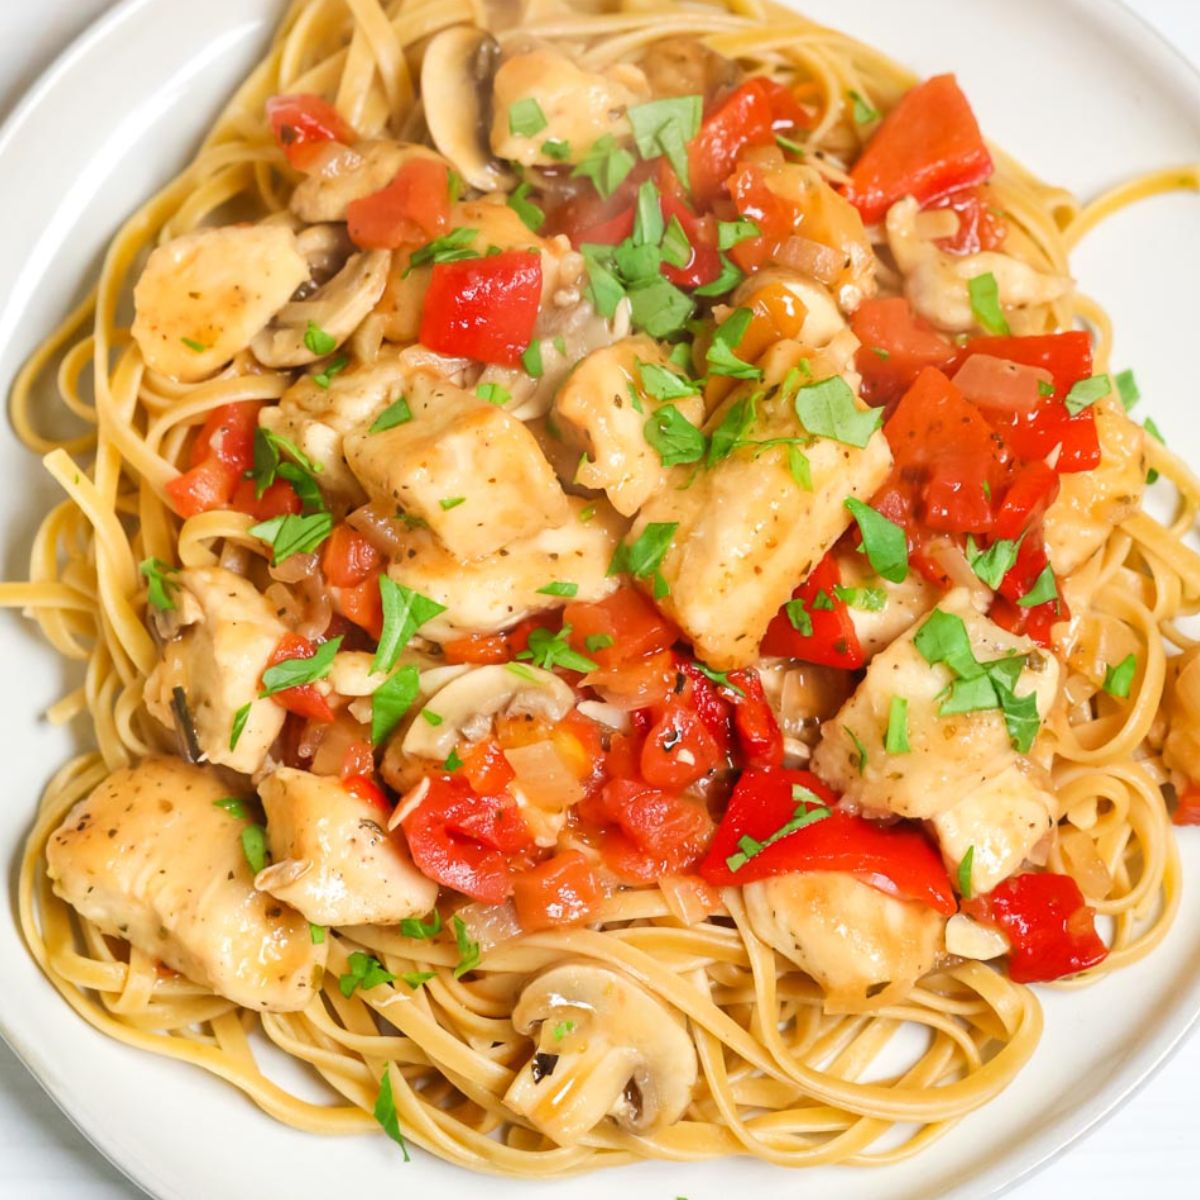 A recipe index entry for a plate of spaghetti topped with chicken, mushrooms, tomatoes, and garnished with chopped parsley.